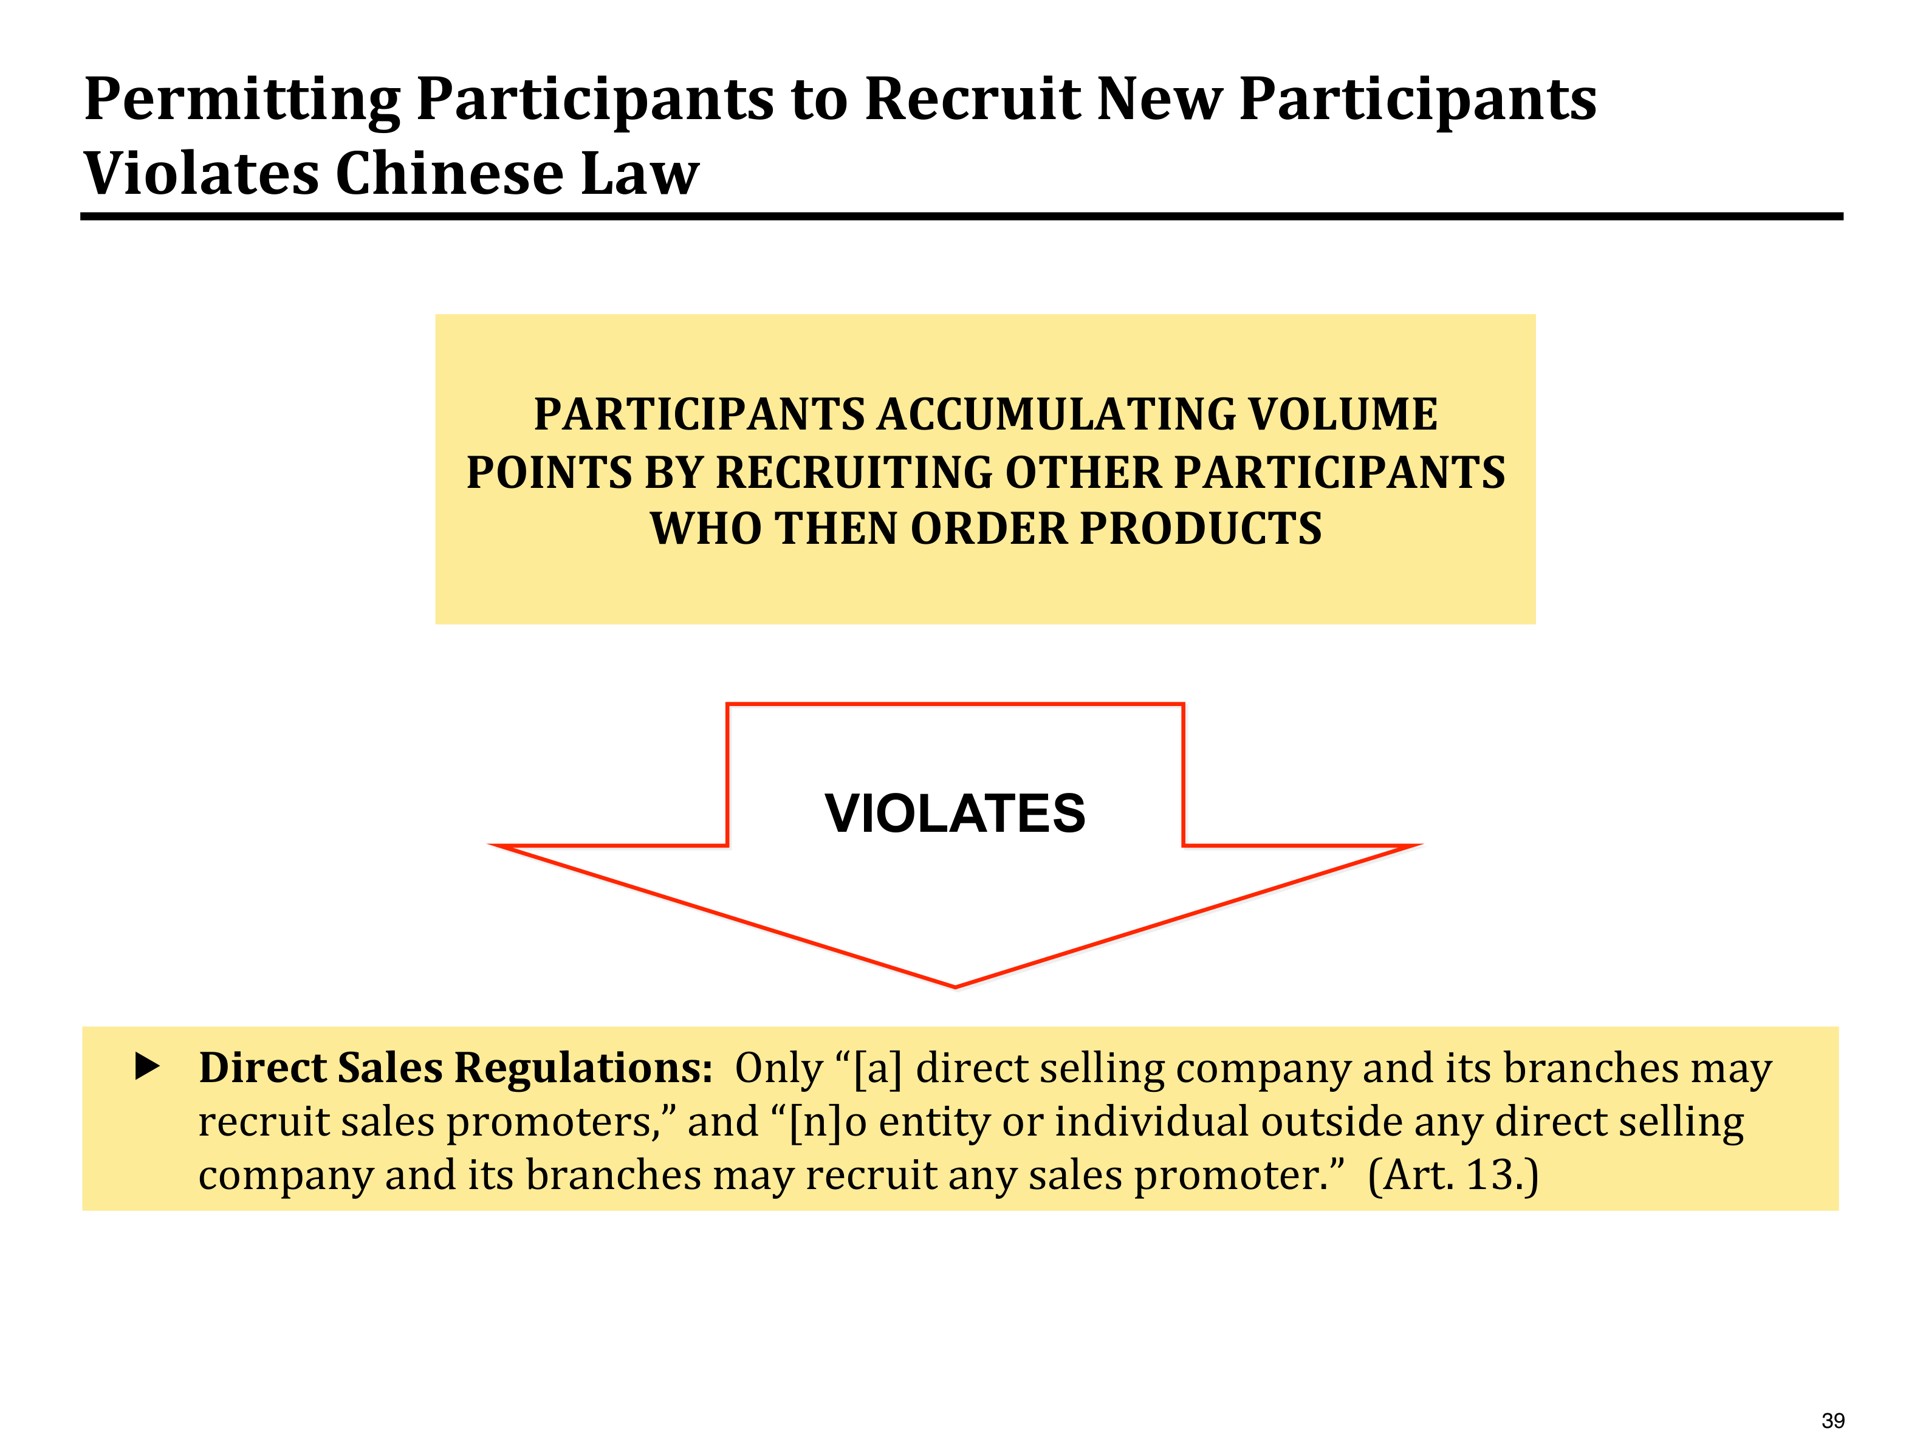 permitting participants to recruit new participants violates law | Pershing Square